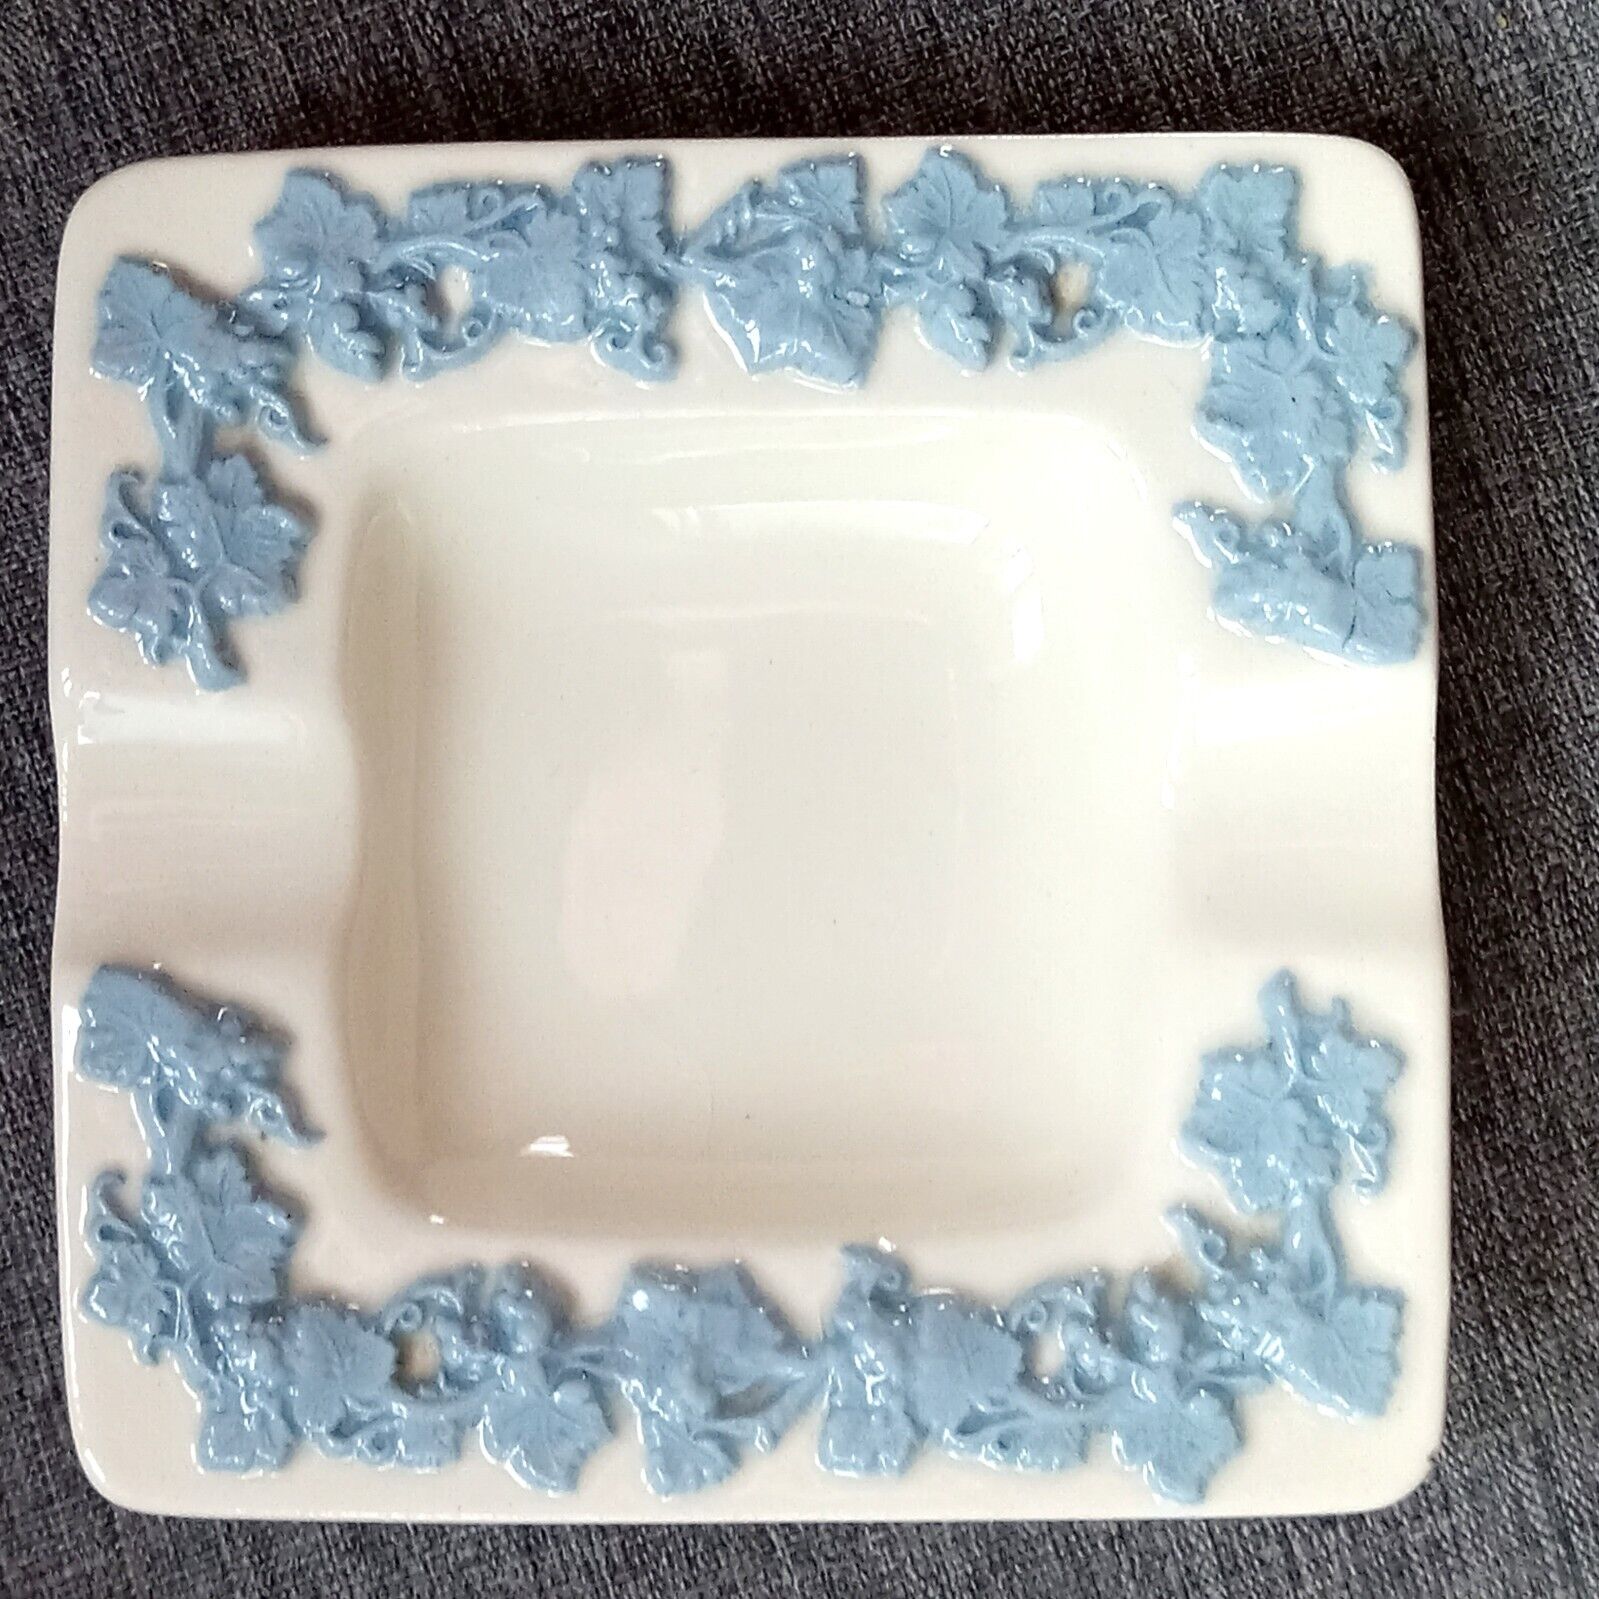 Vintage WEDGEWOOD ASHTRAY Trinket Ring Tray, Embossed Queen\'s Ware Lavender